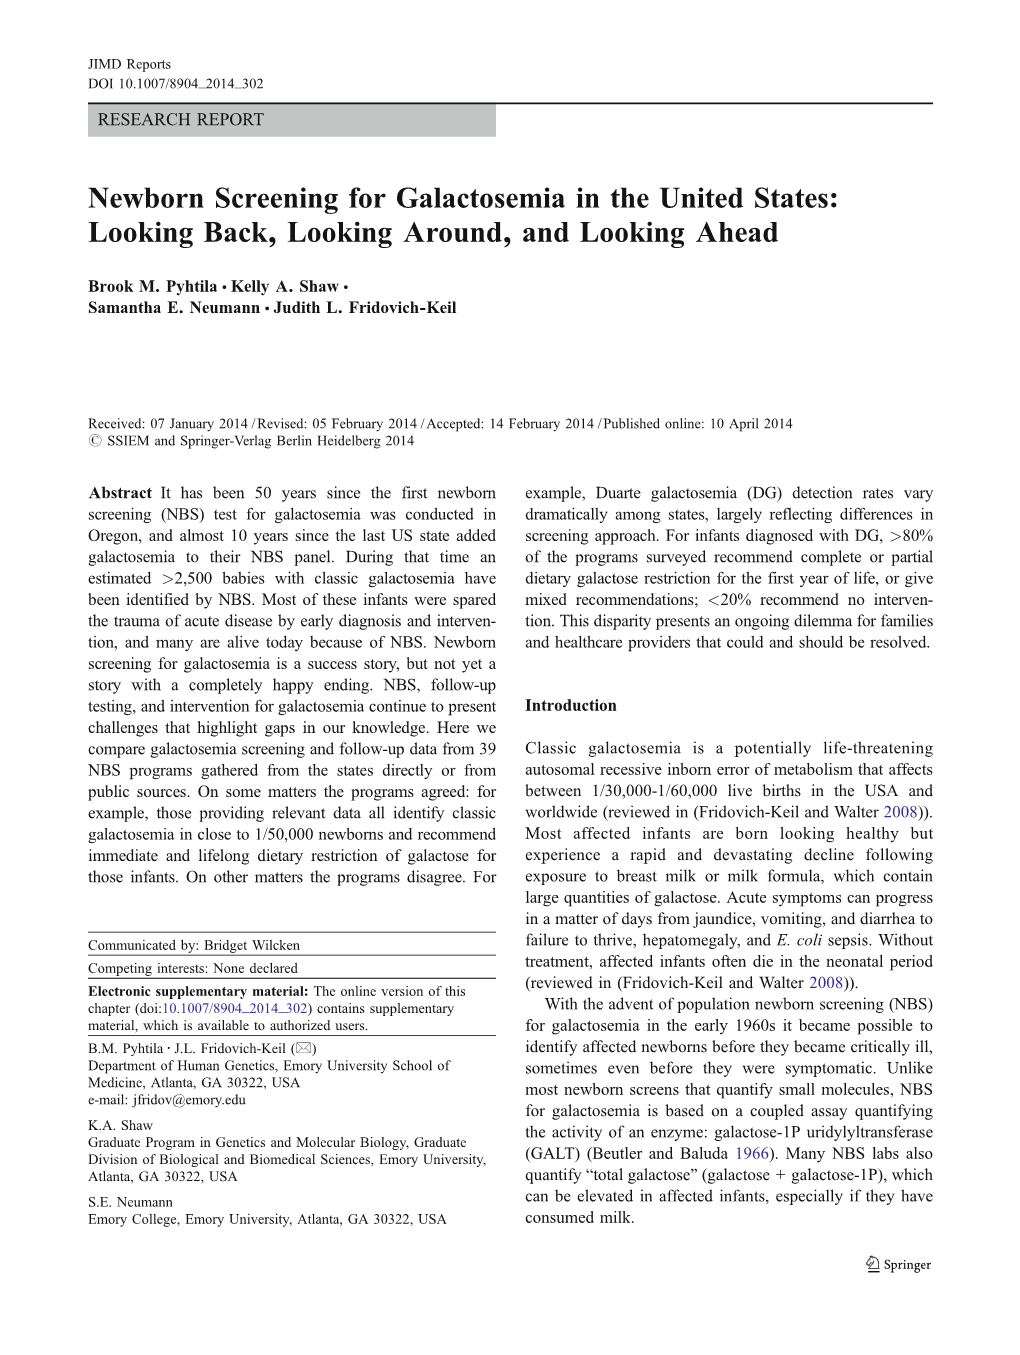 Newborn Screening for Galactosemia in the United States: Looking Back, Looking Around, and Looking Ahead